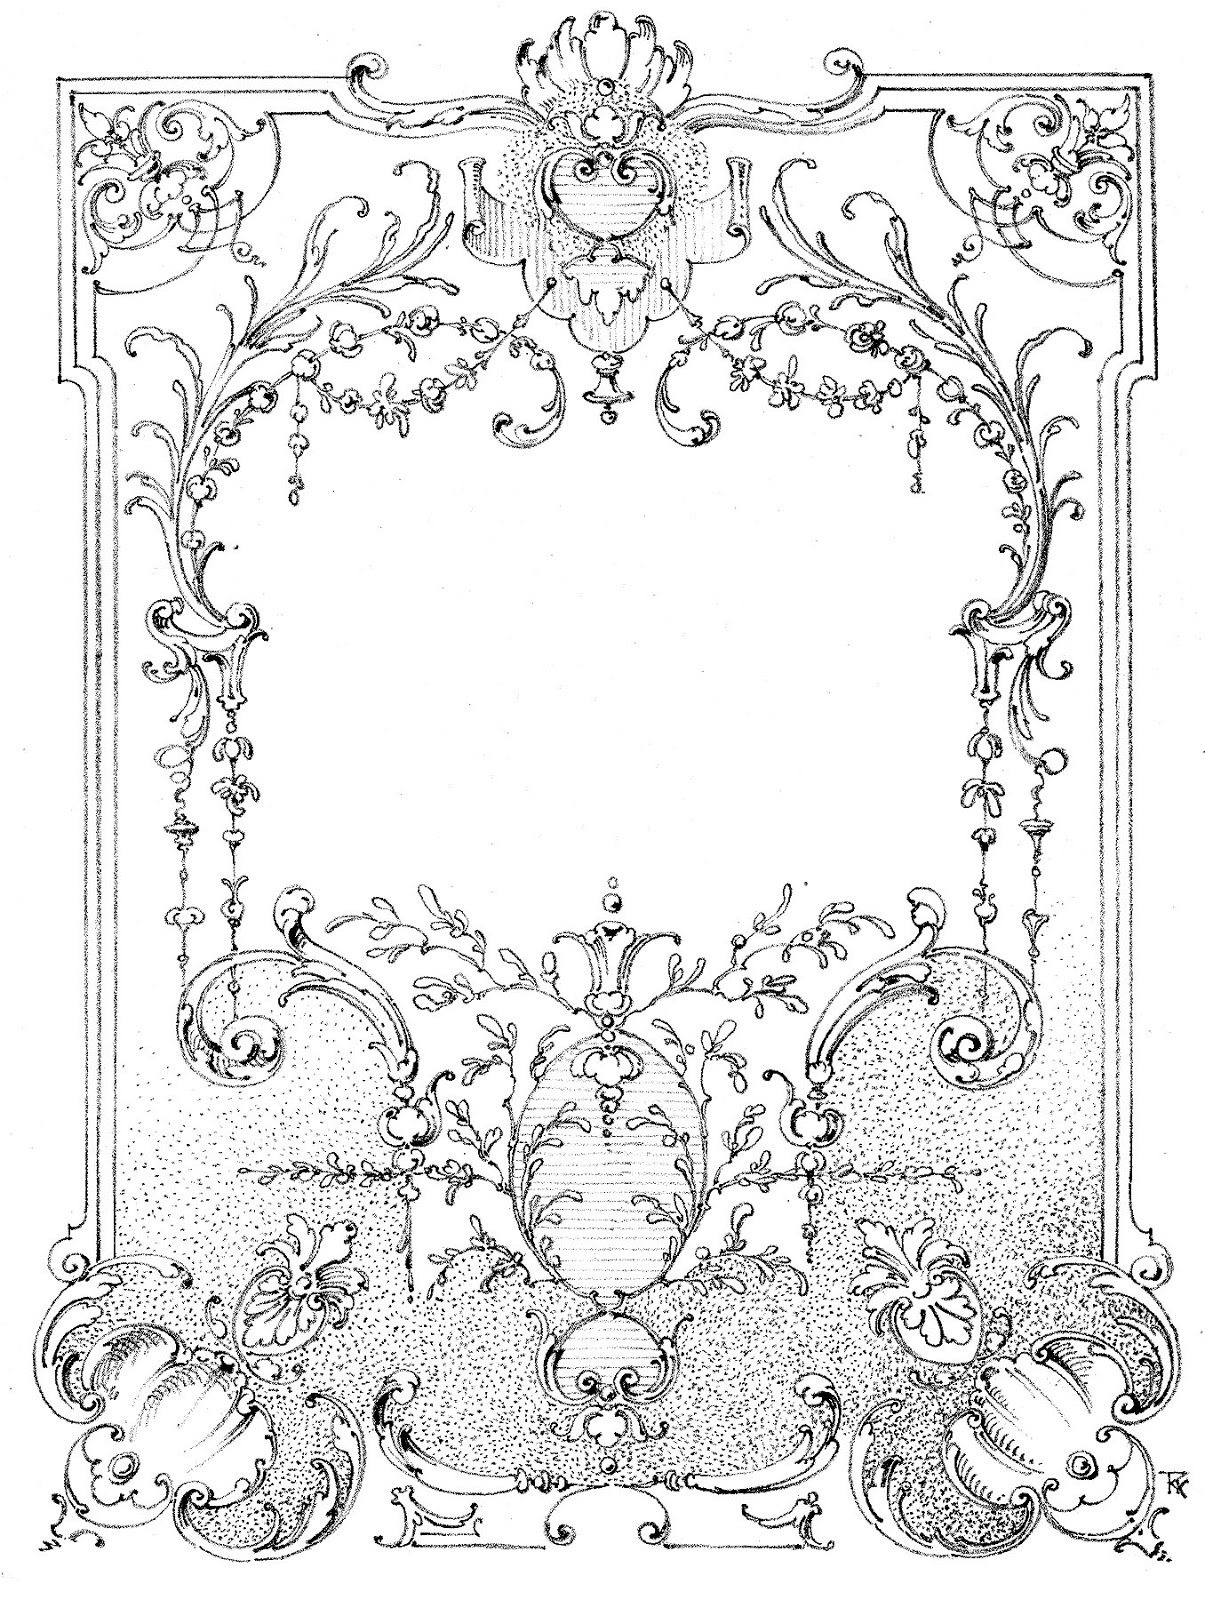 ornate wedding free clipart and printables - photo #40